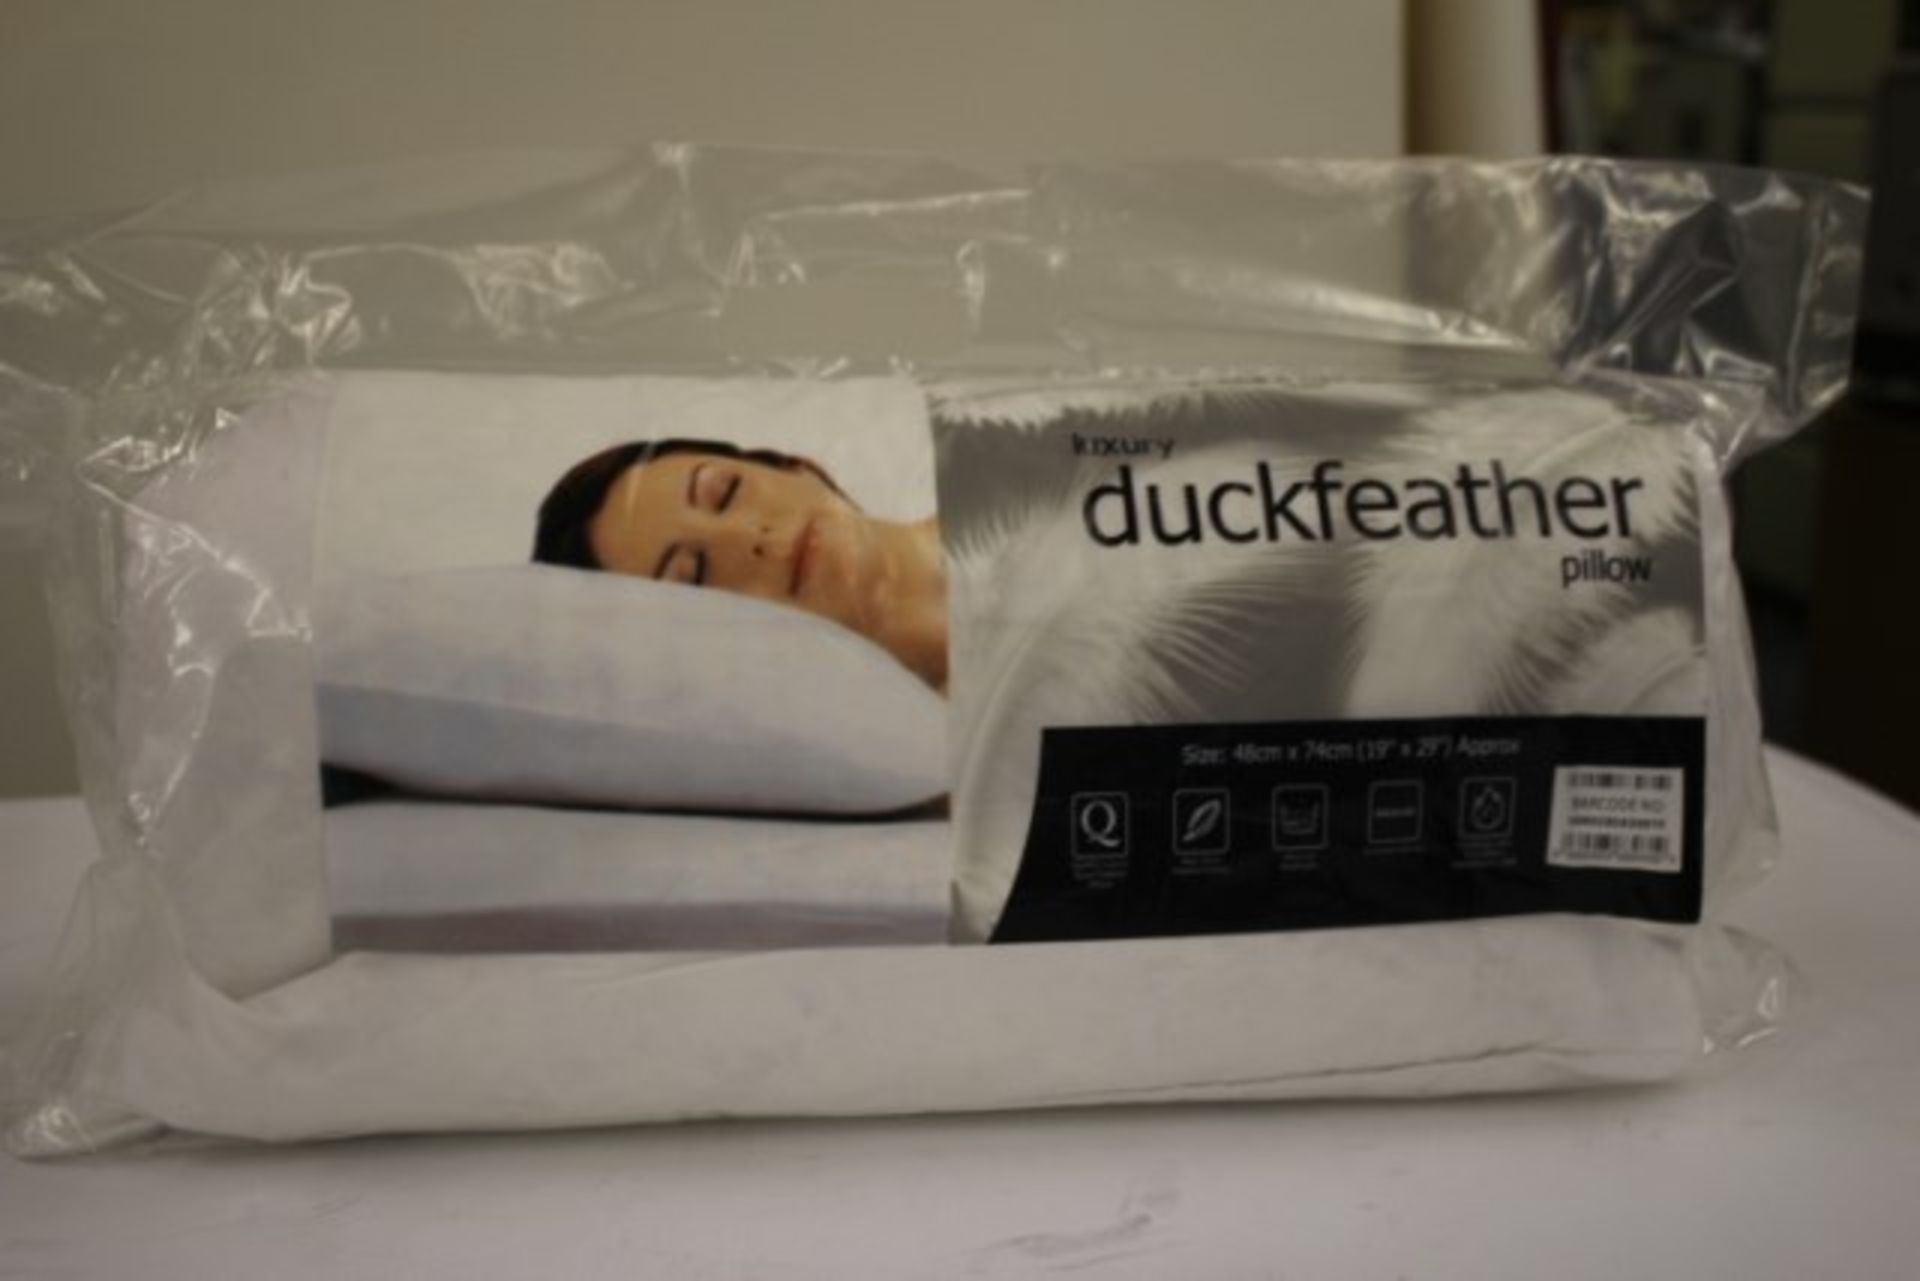 V Brand New Luxury Duck Feather Pillow RRP £29.99 X 20 Bid price to be multiplied by Twenty - Image 2 of 2